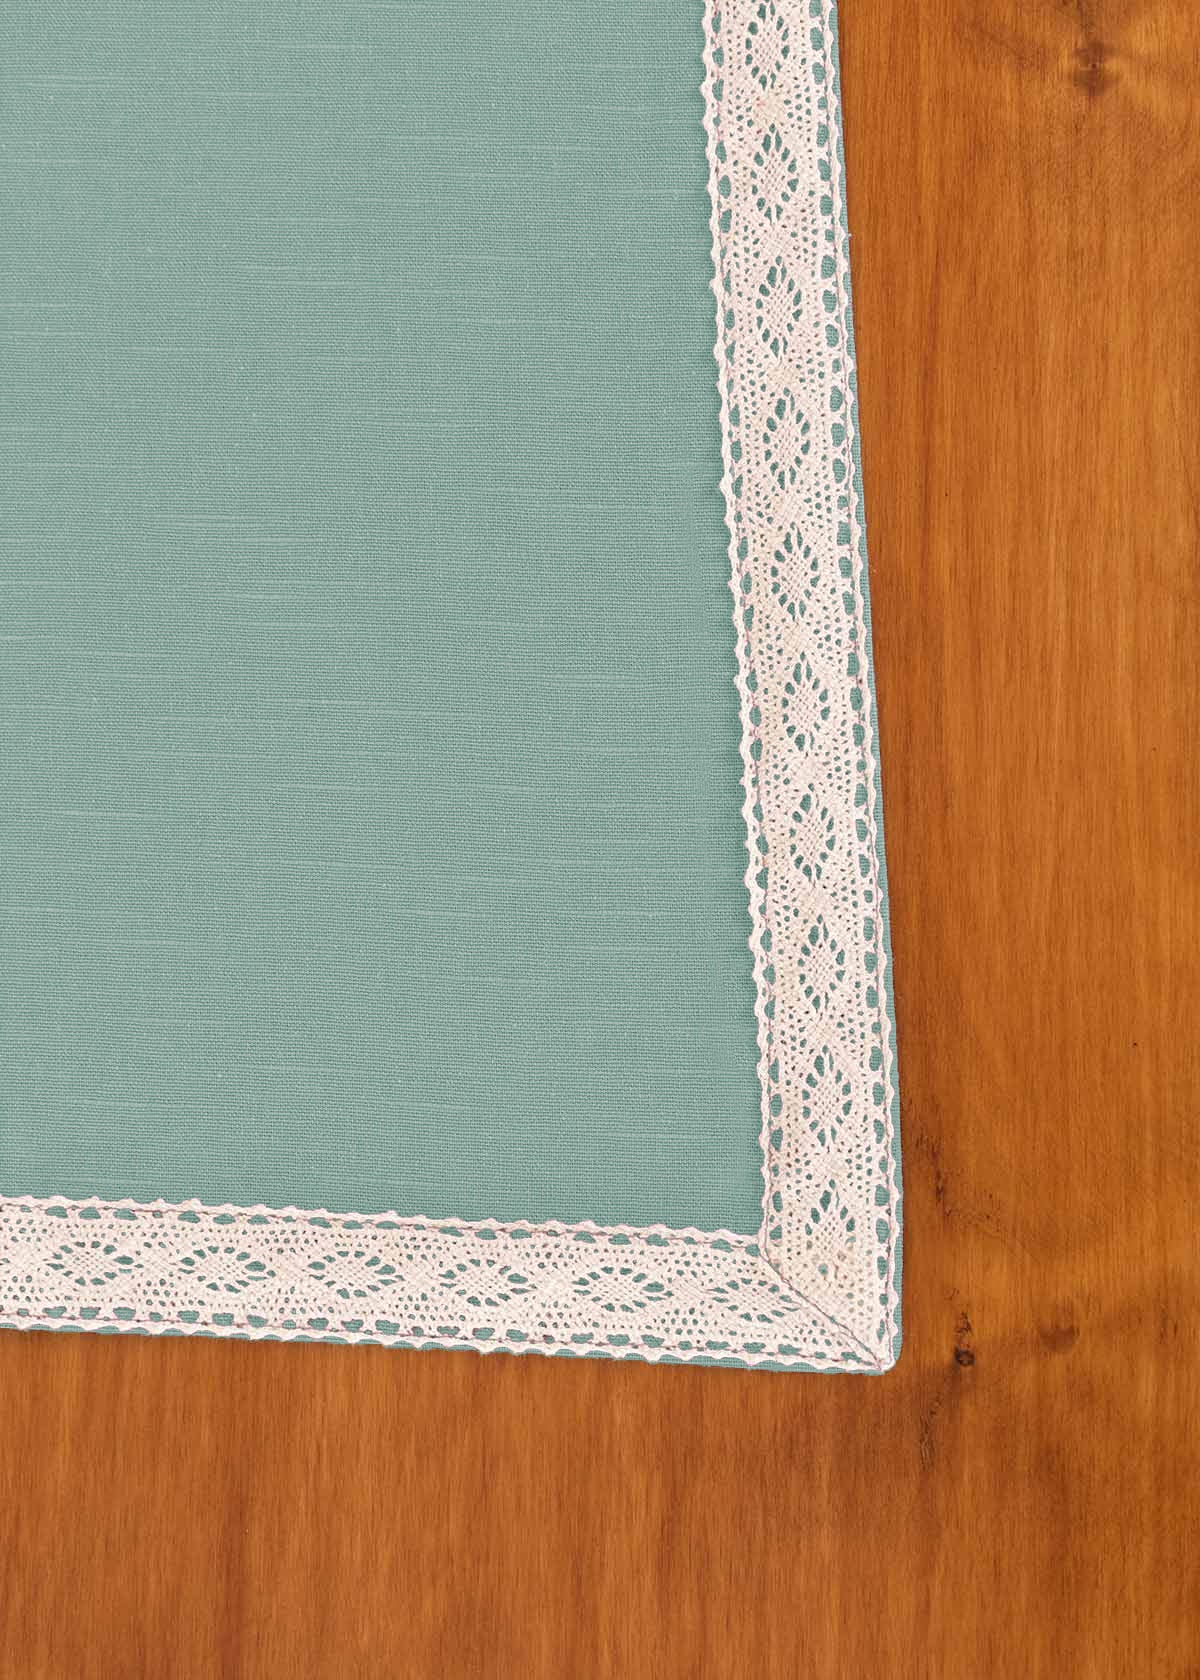 Solid Nile Blue 100% cotton plain table cloth for 4 seater or 6 seater dining with lace border